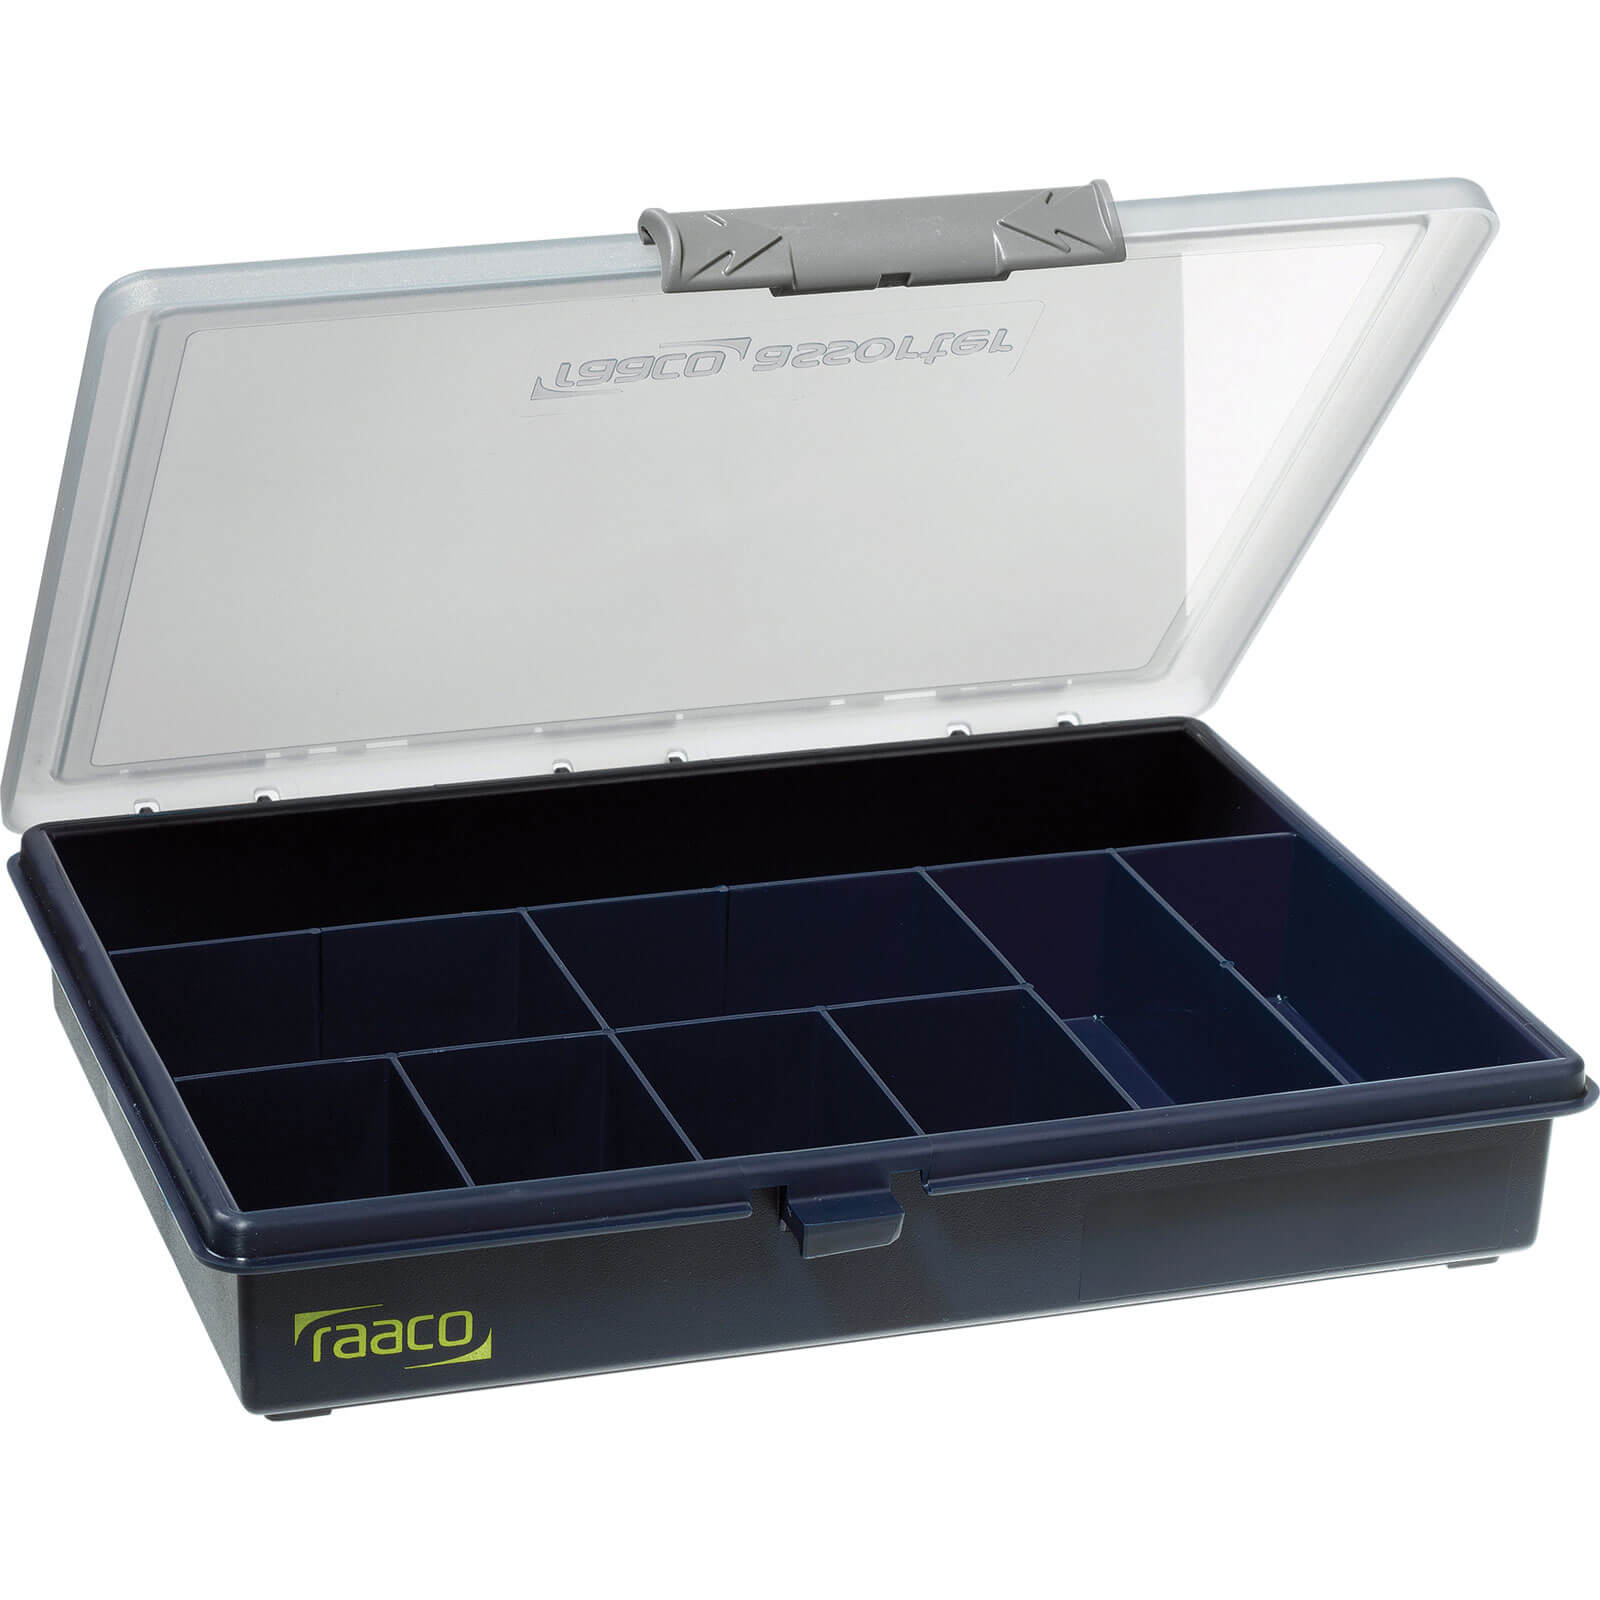 Image of Raaco 9 Compartment A5 Organiser Case